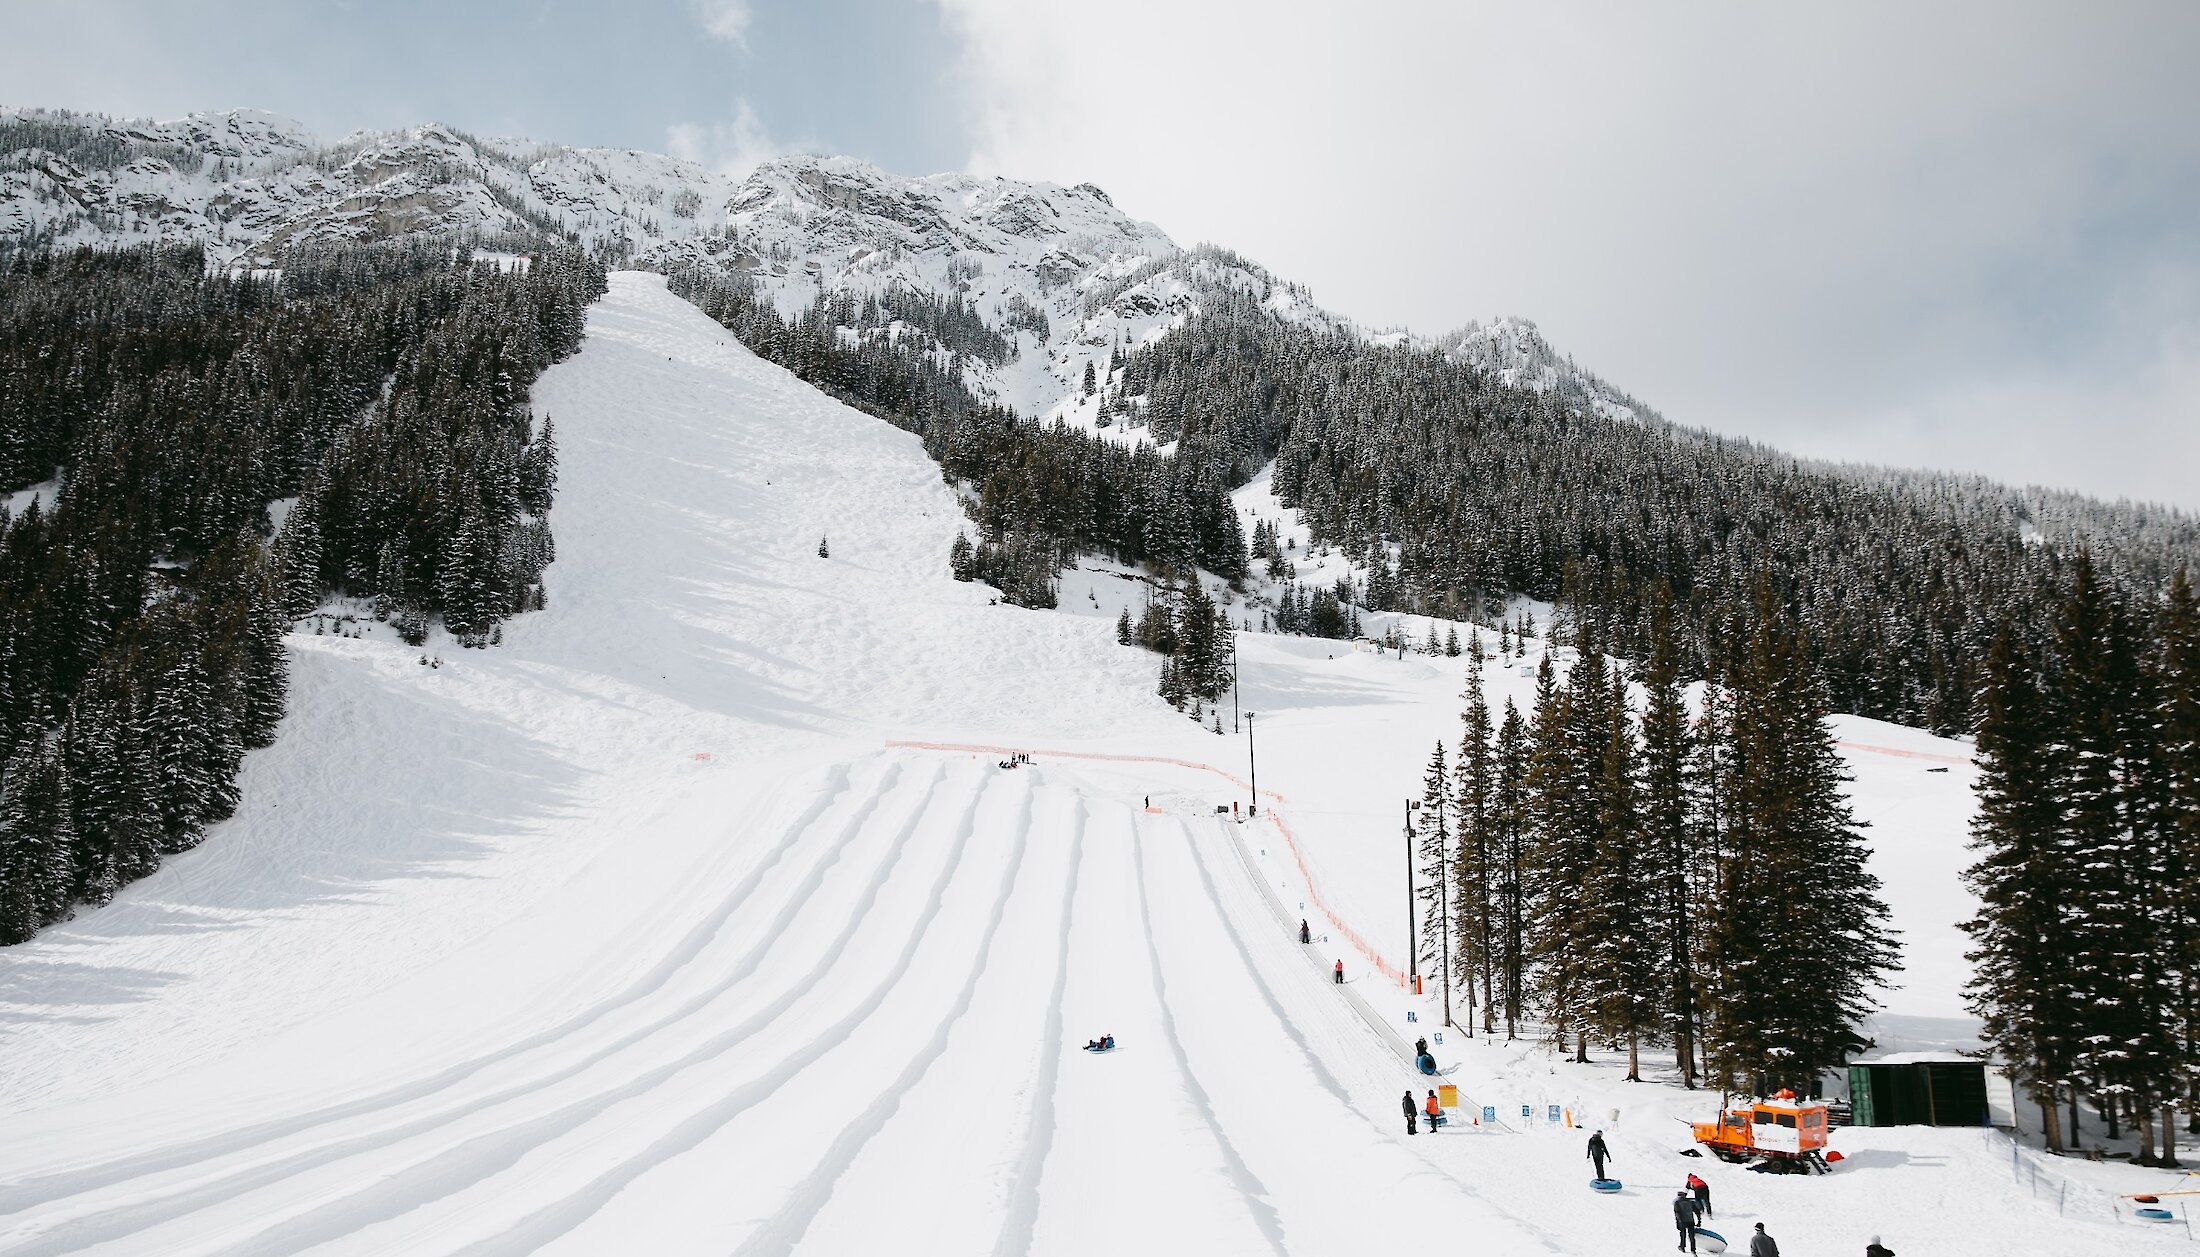 The many tube park lanes at Mount Norquay